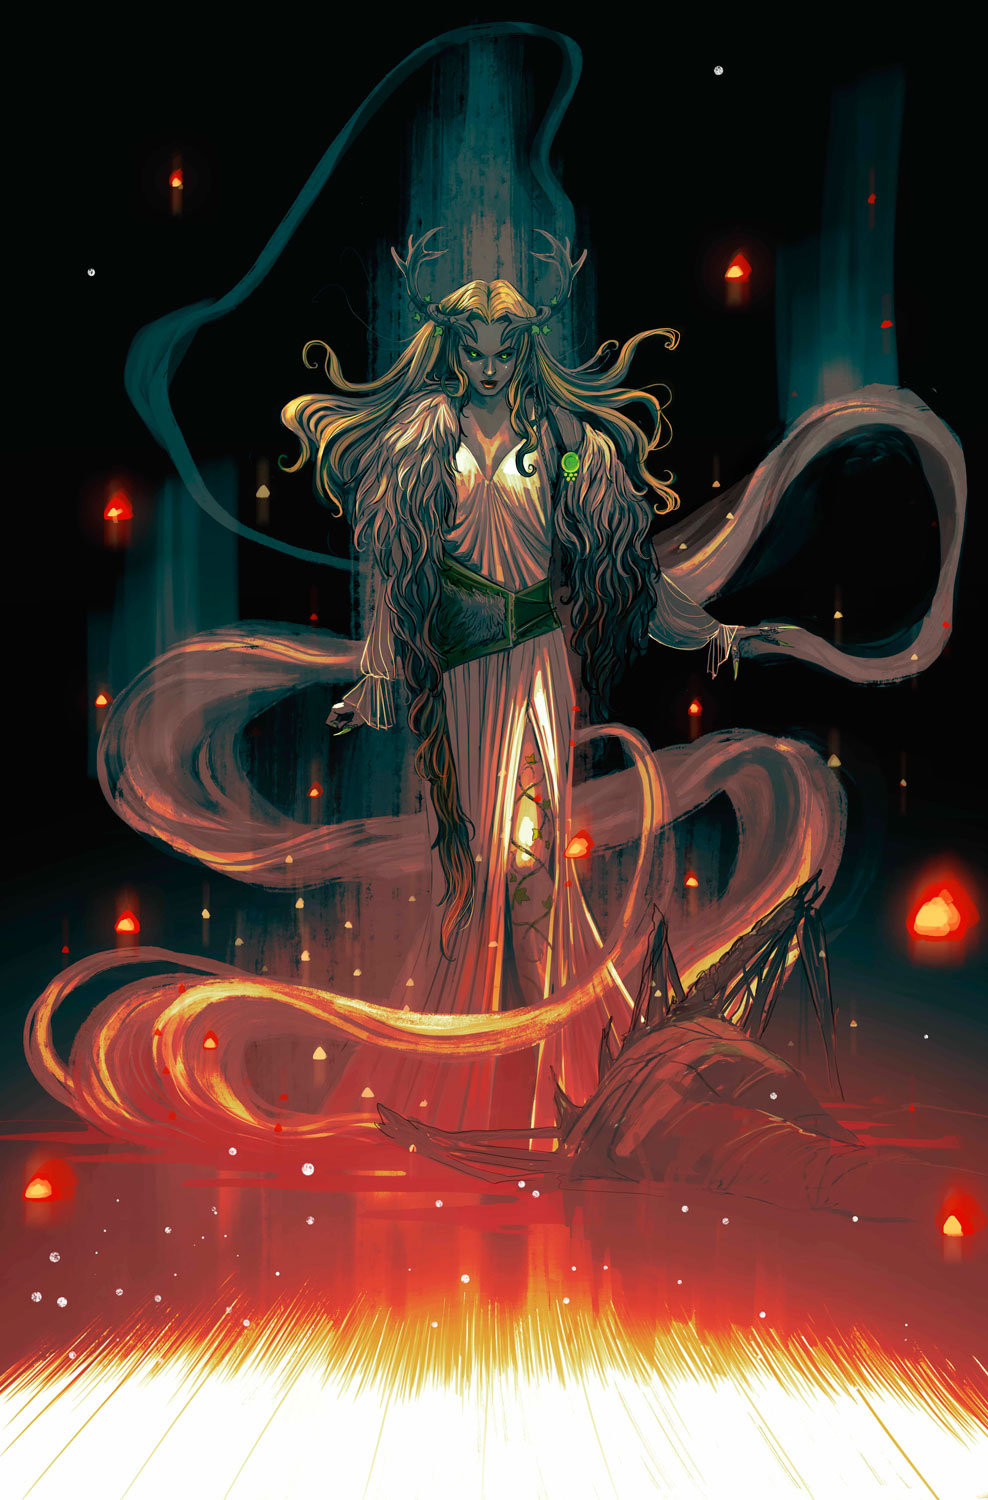 Just one example of the cool art to be found in 1602: Witch Hunter Angela #1